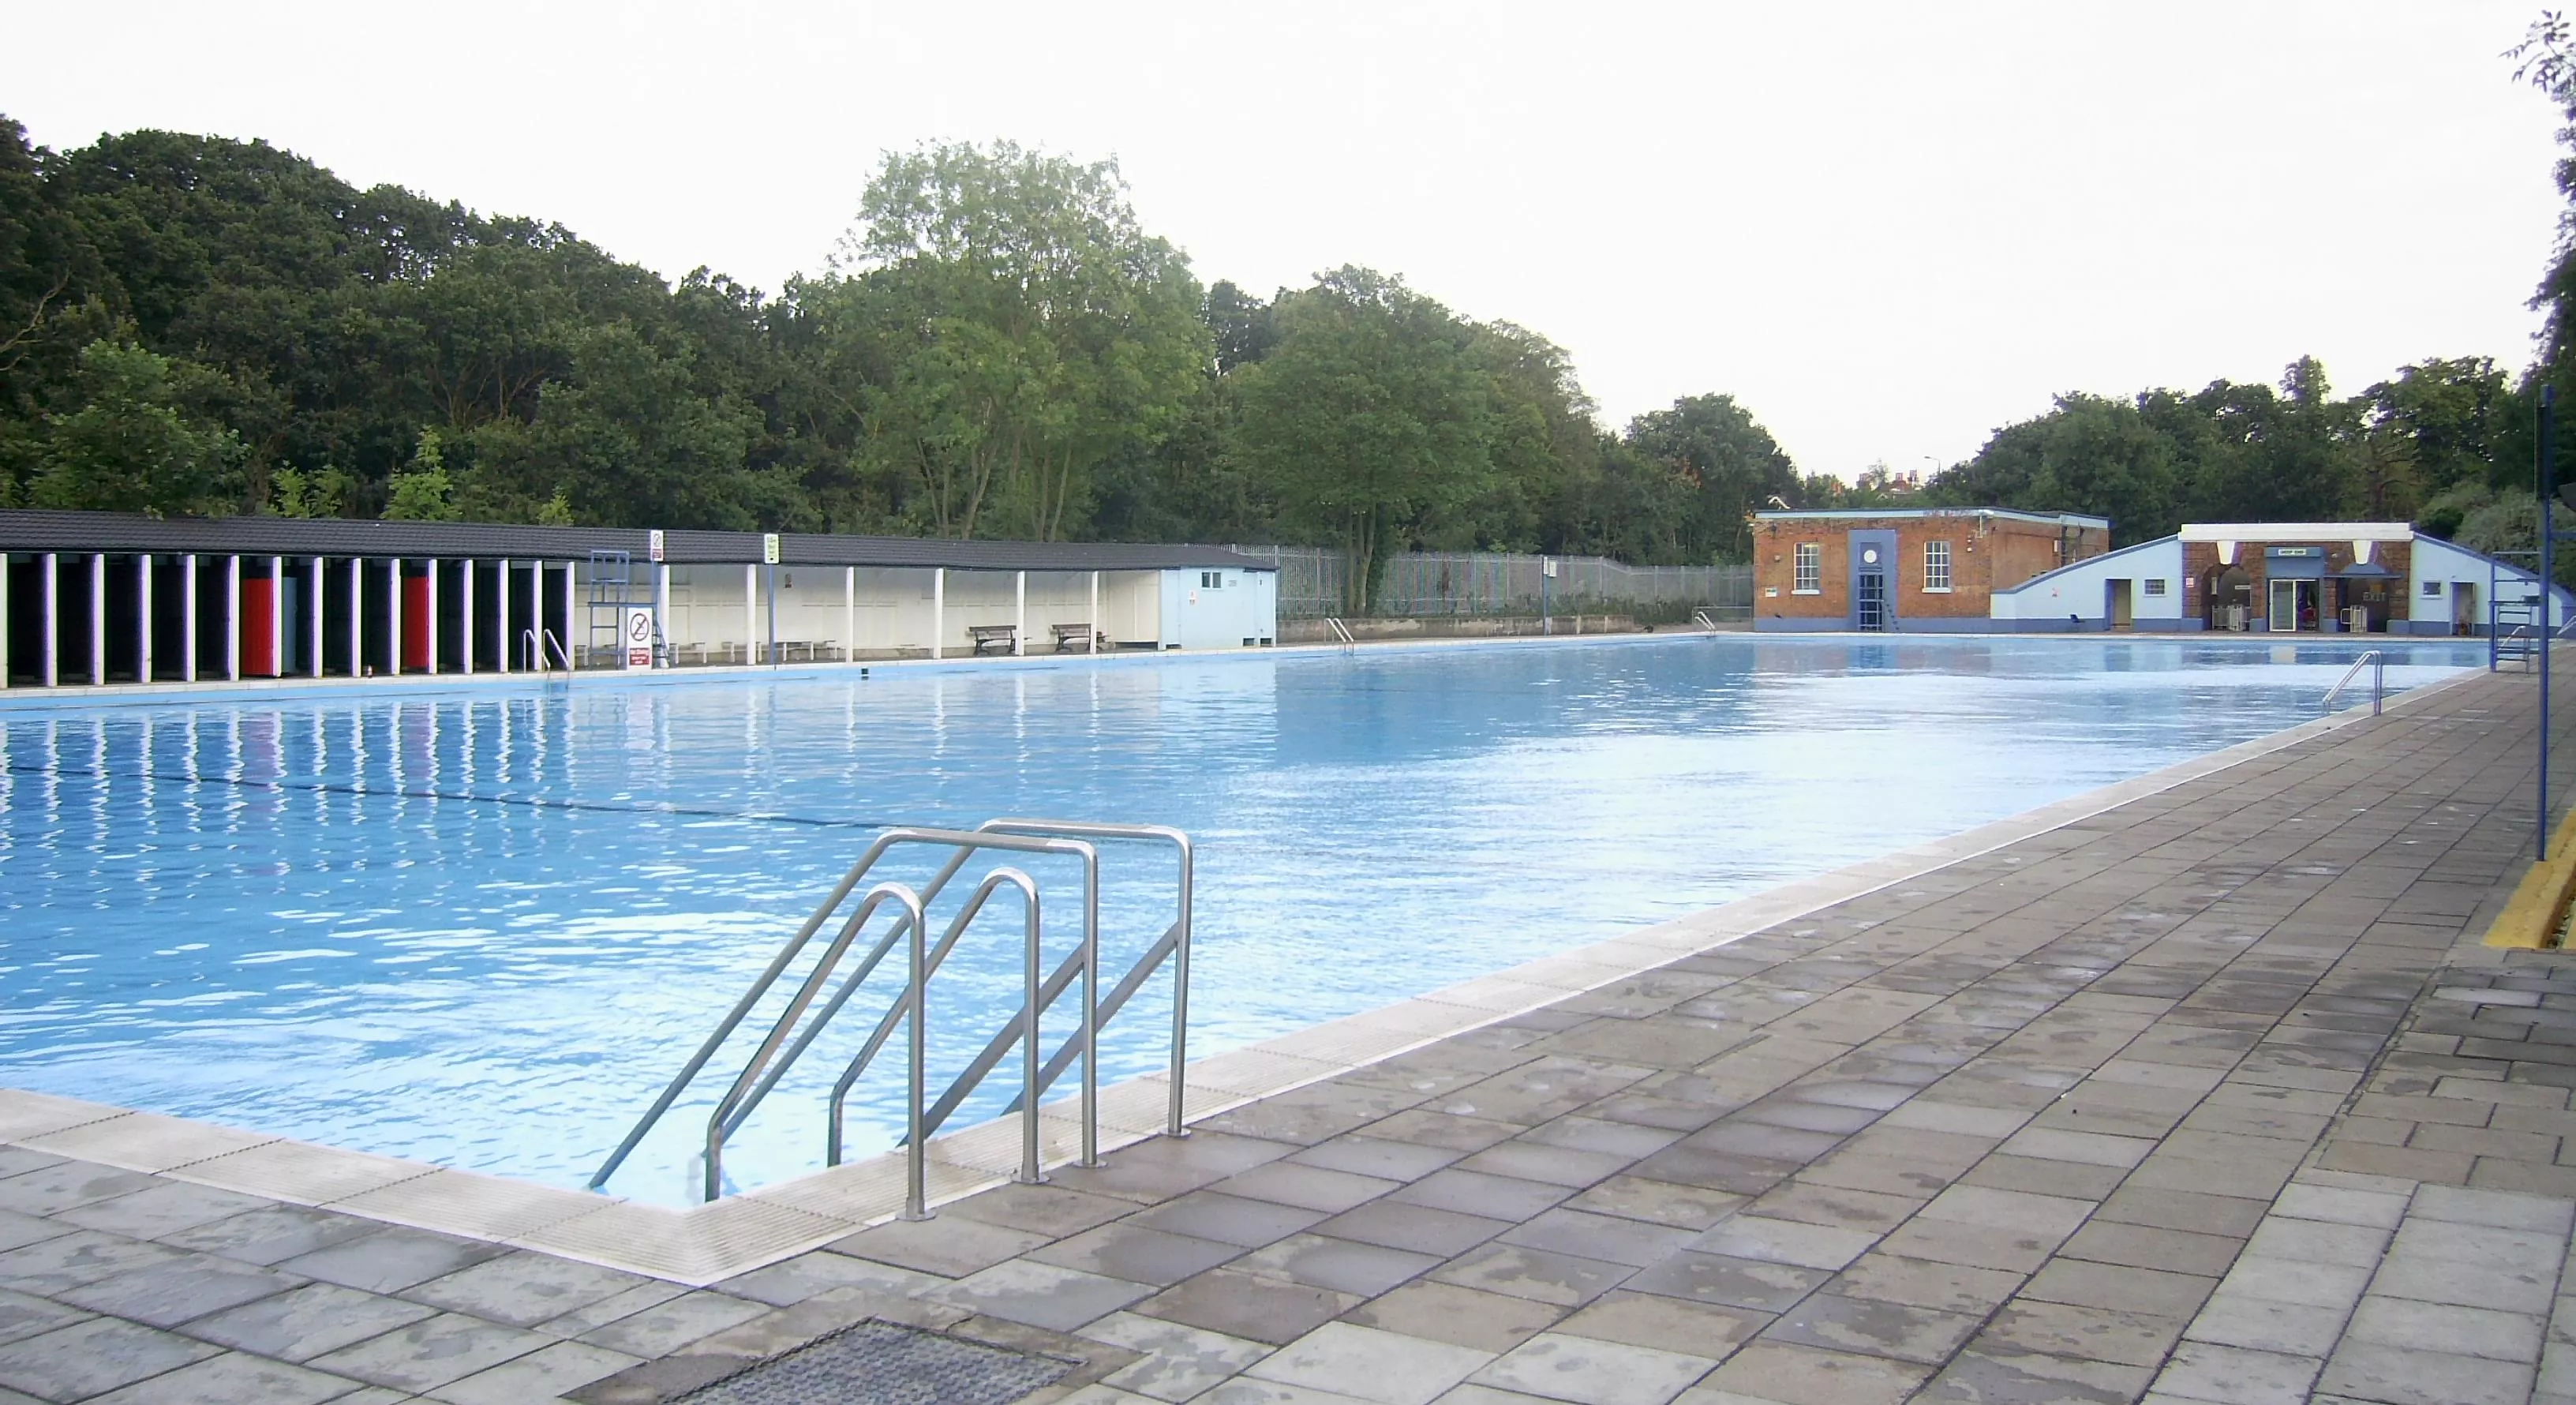 Tooting Bec Lido in United Kingdom, Europe | Swimming - Rated 3.6